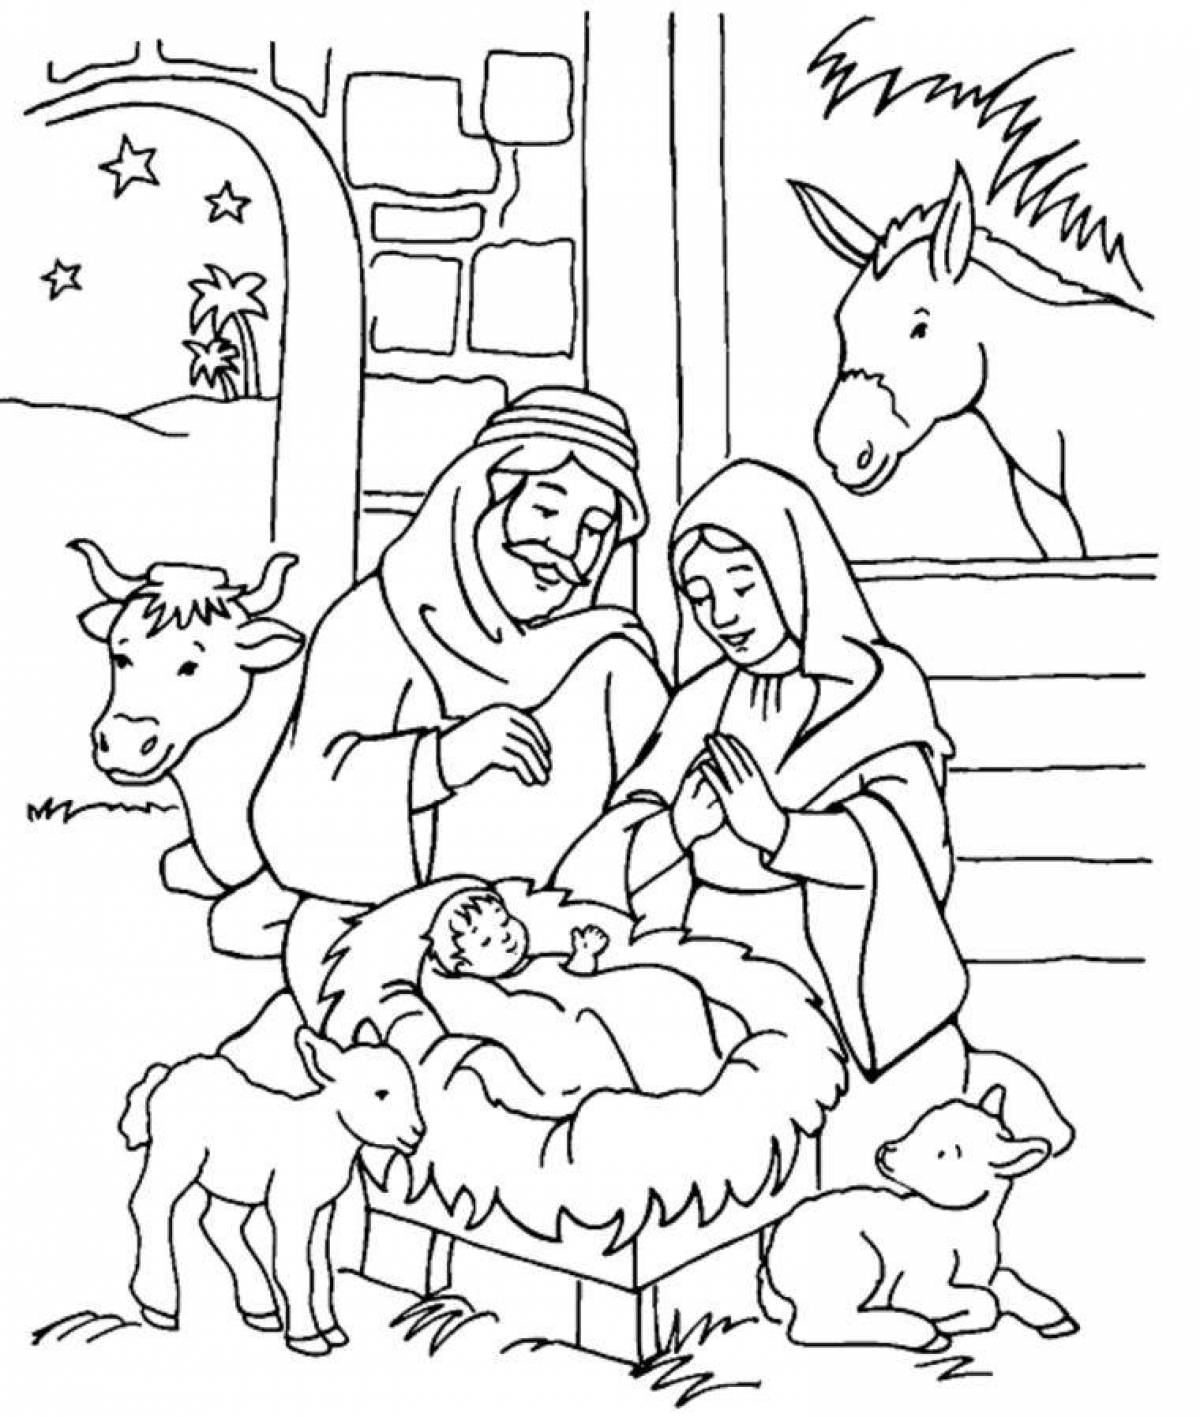 Great christmas coloring book